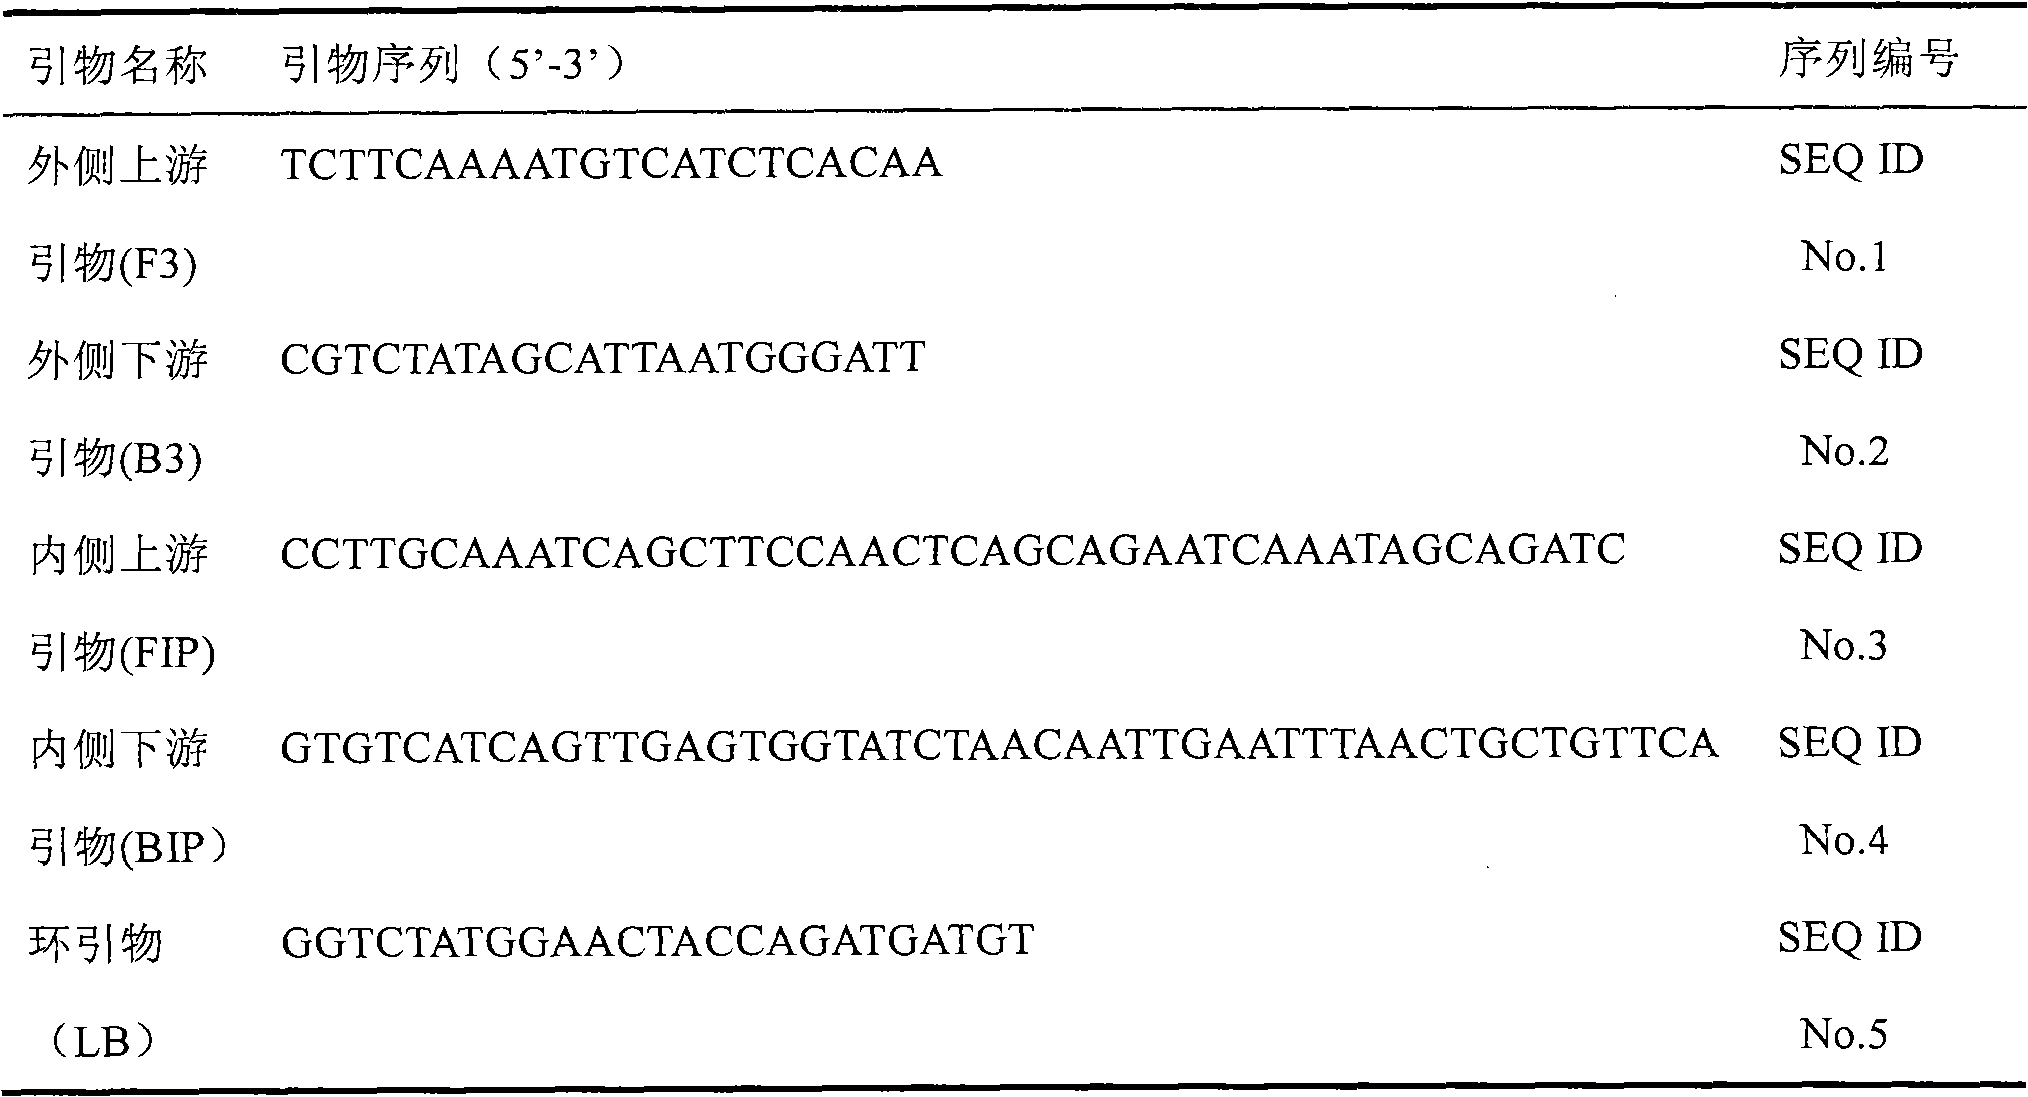 Kit and oligonucleotide sequences for detecting rotavirus A